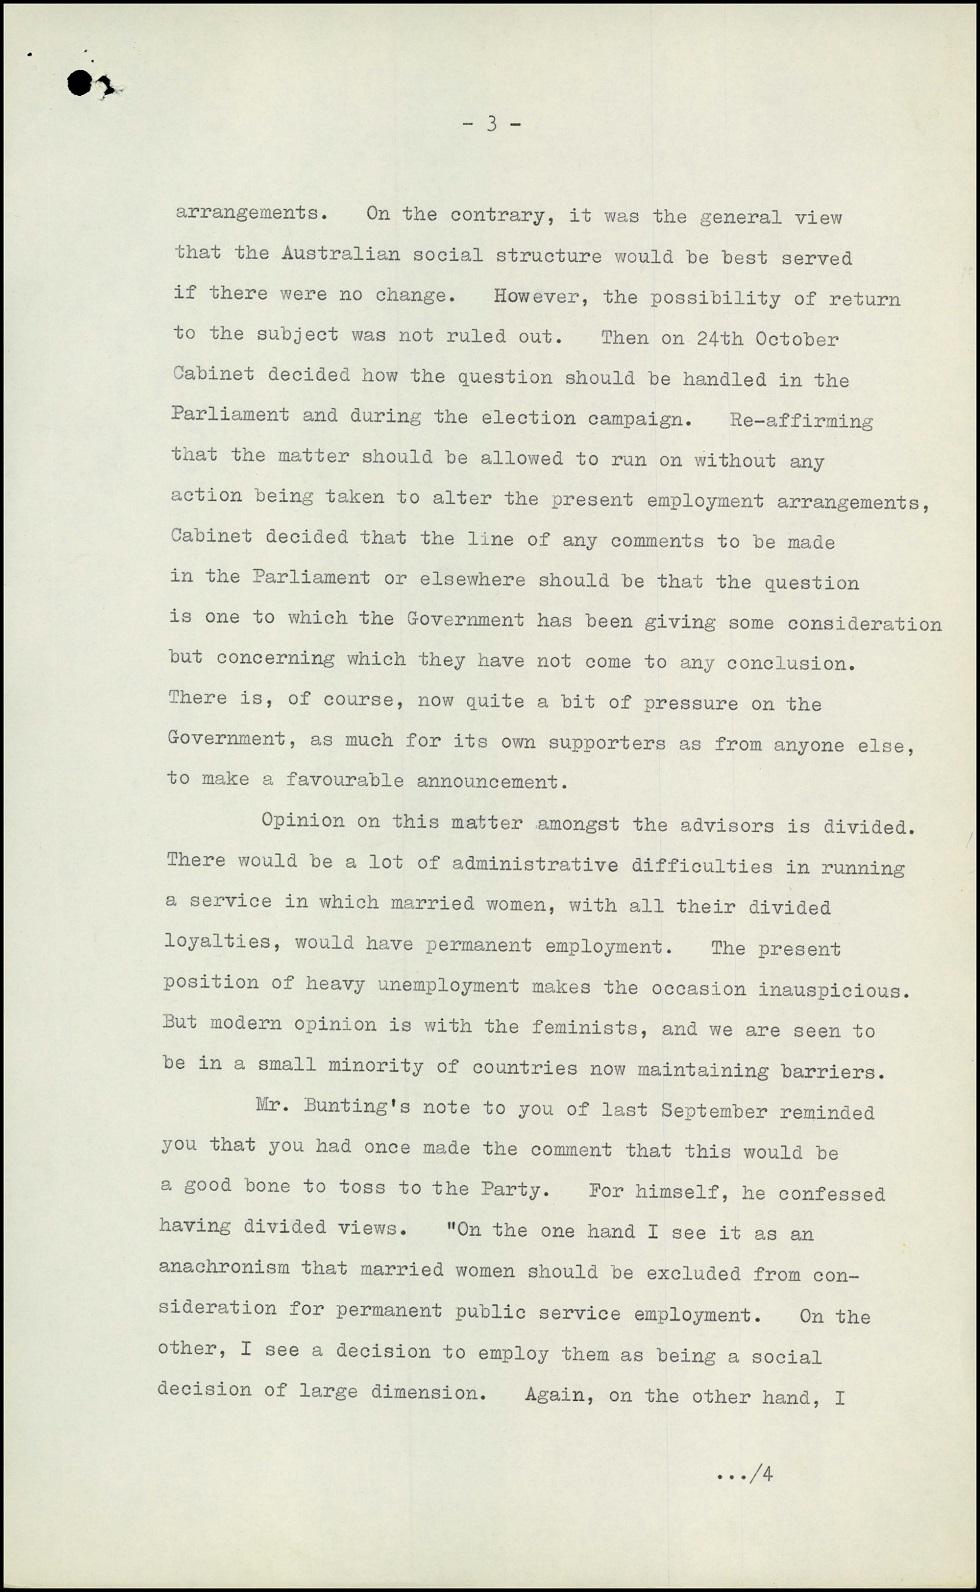 Typed letter with ‘Confidential’ and the words ‘Note for Cabinet discussions: Appointment of Married Women to Permanent Public Service’ underlined.